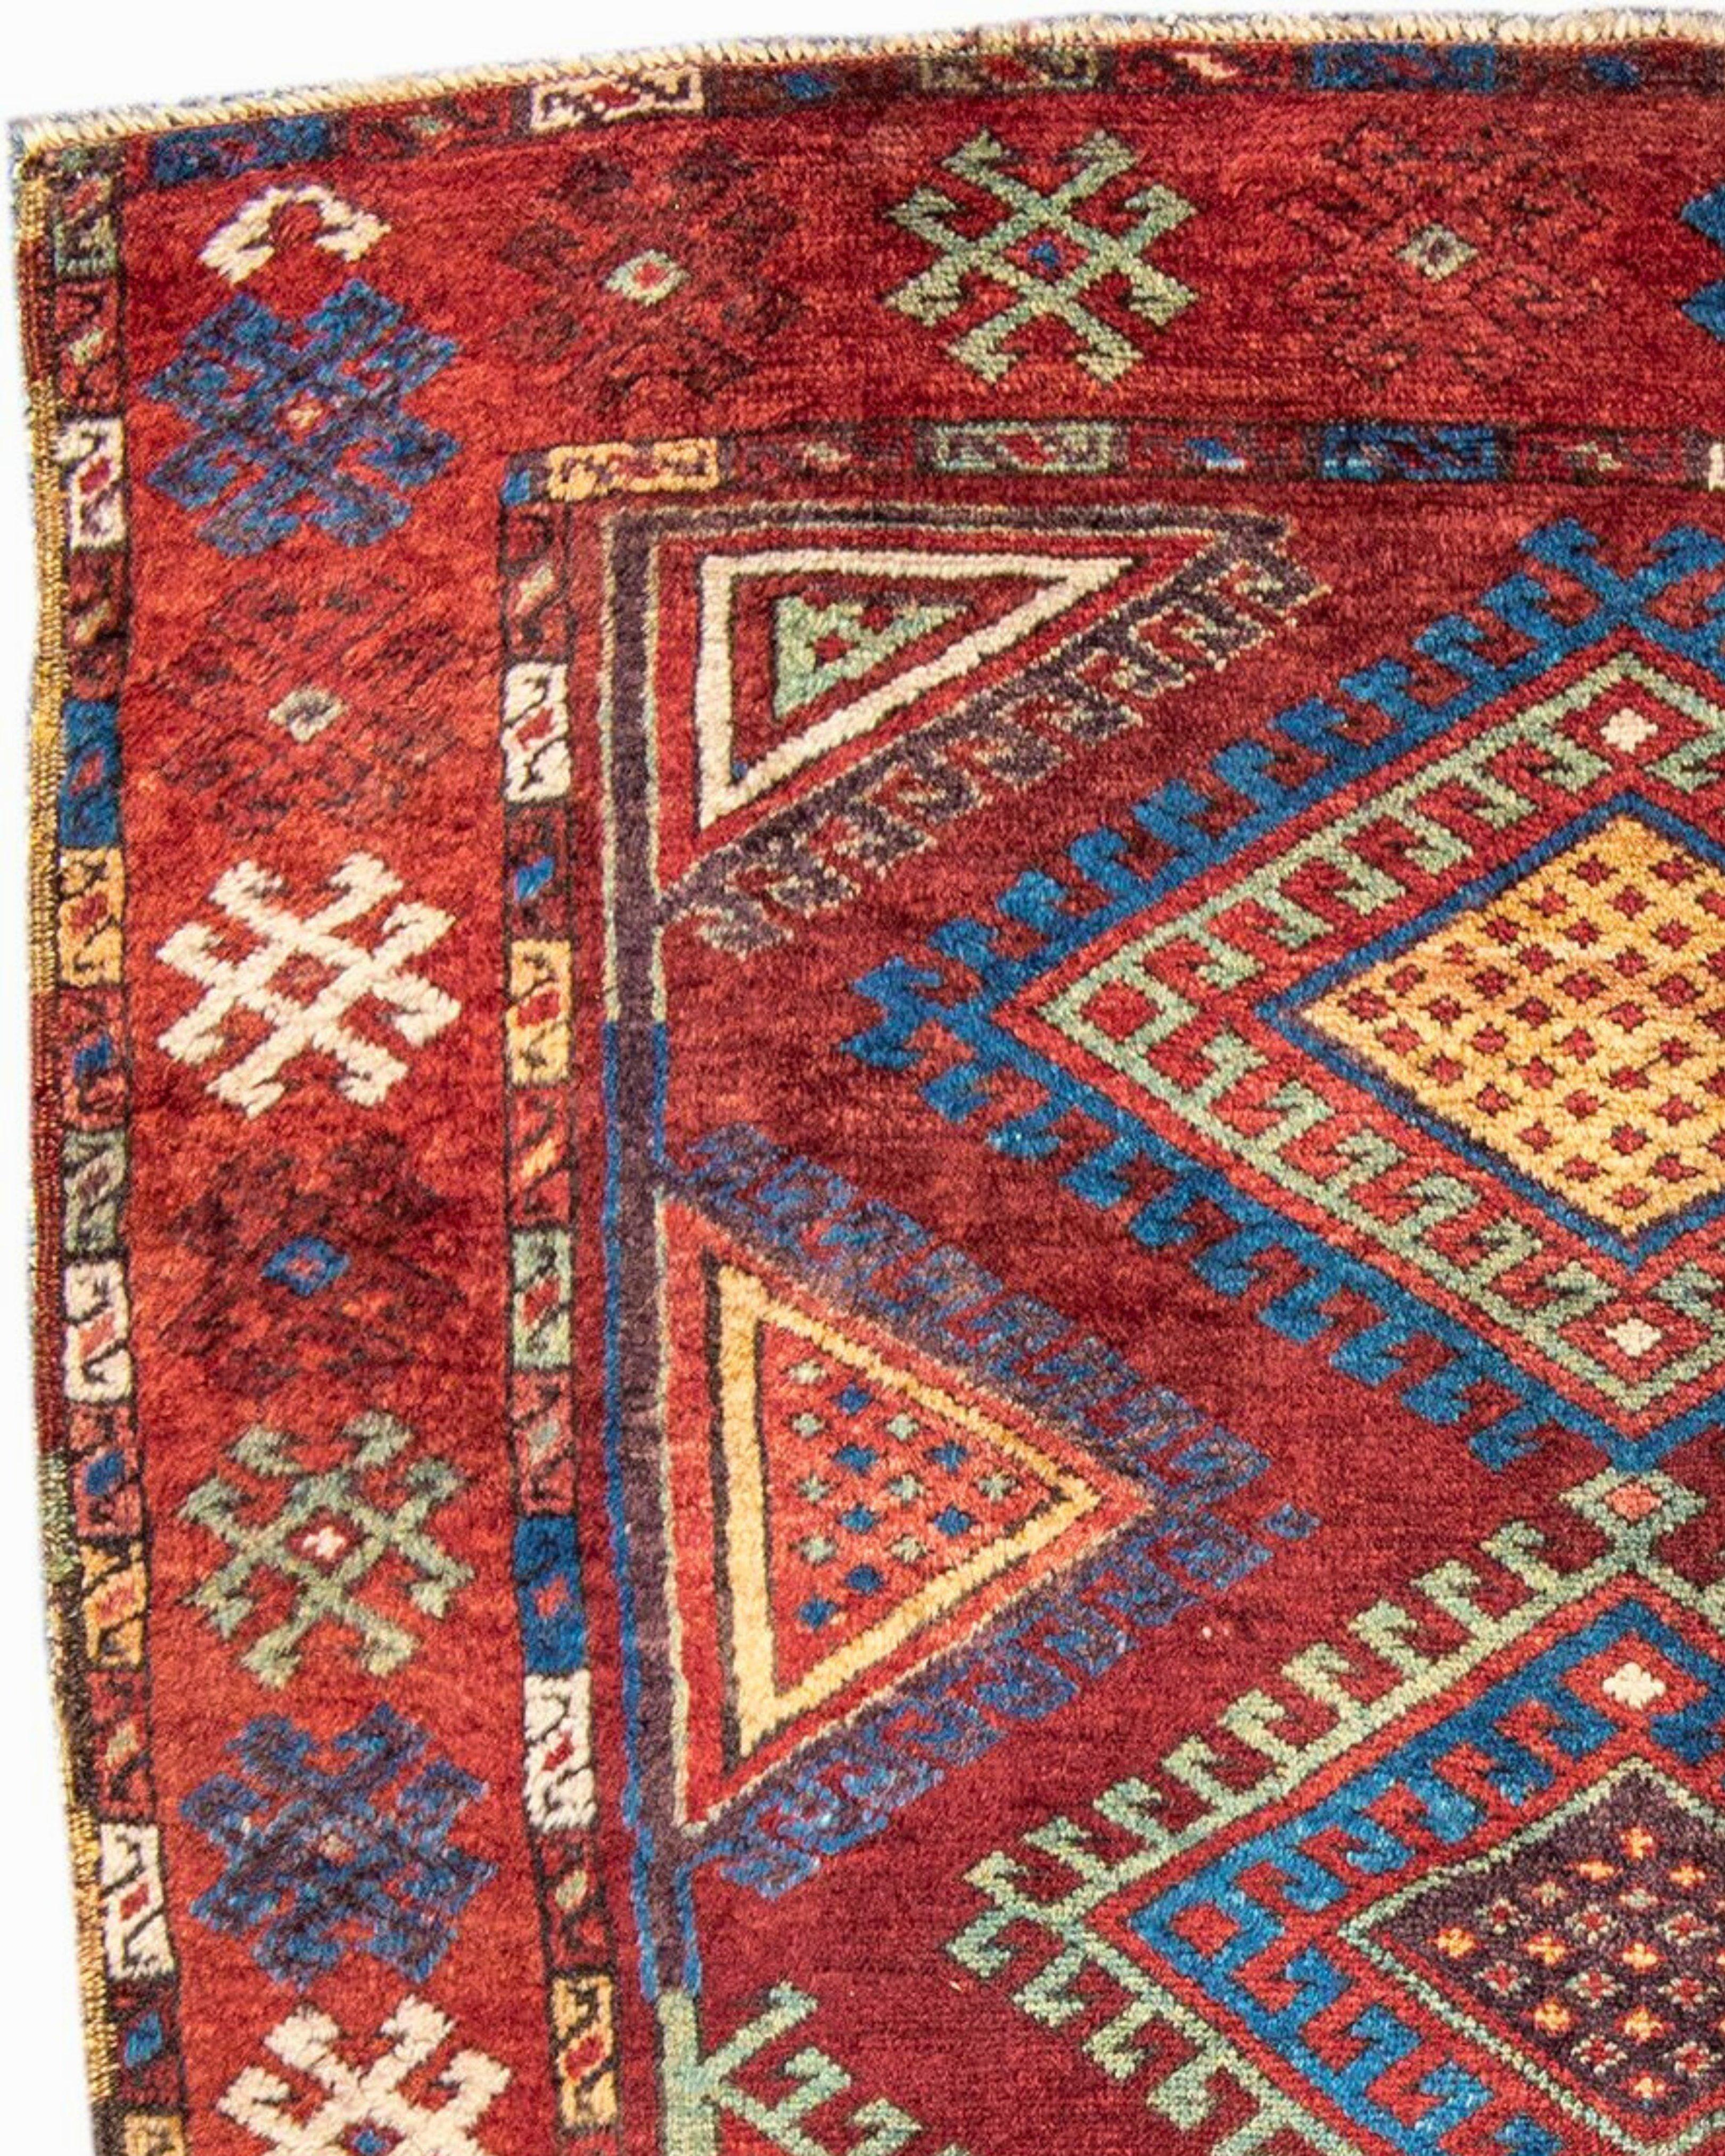 Antique Turkish Konya Yatak Rug, 19th Century In Excellent Condition For Sale In San Francisco, CA